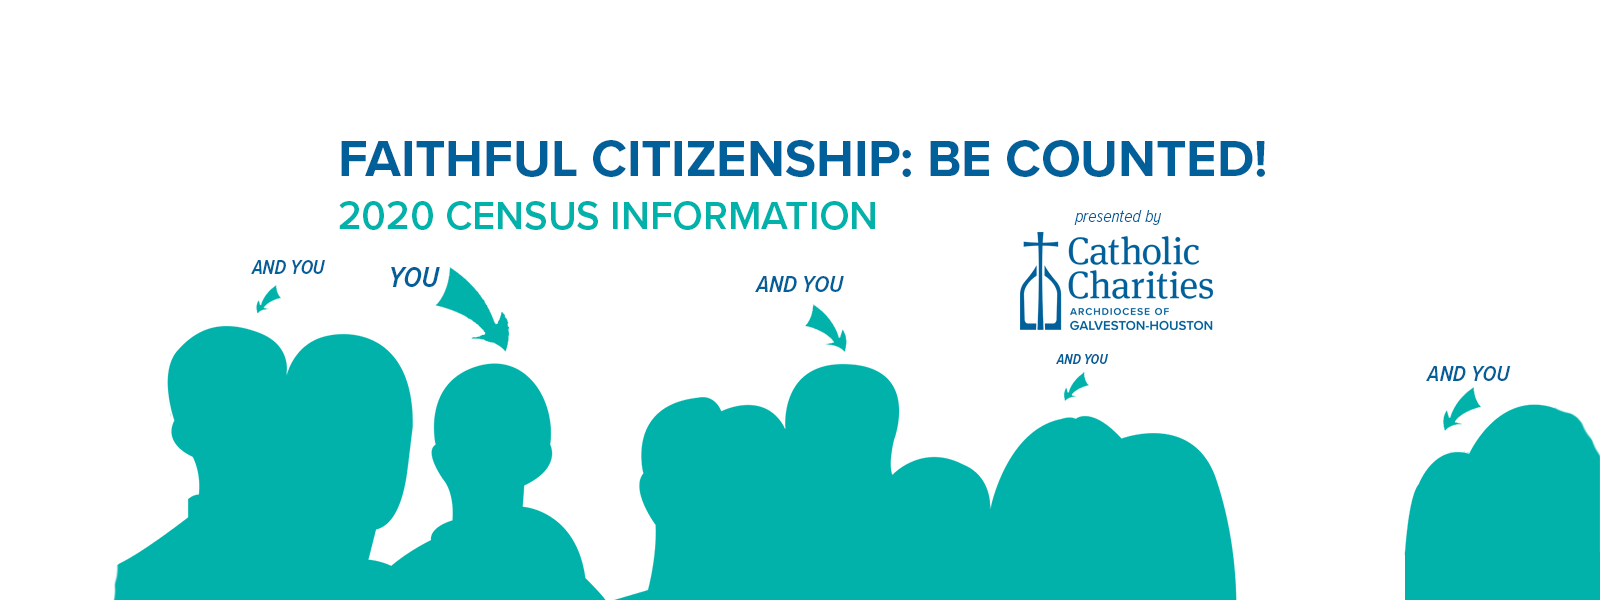 Be counted in the 2020 U.S. Census!